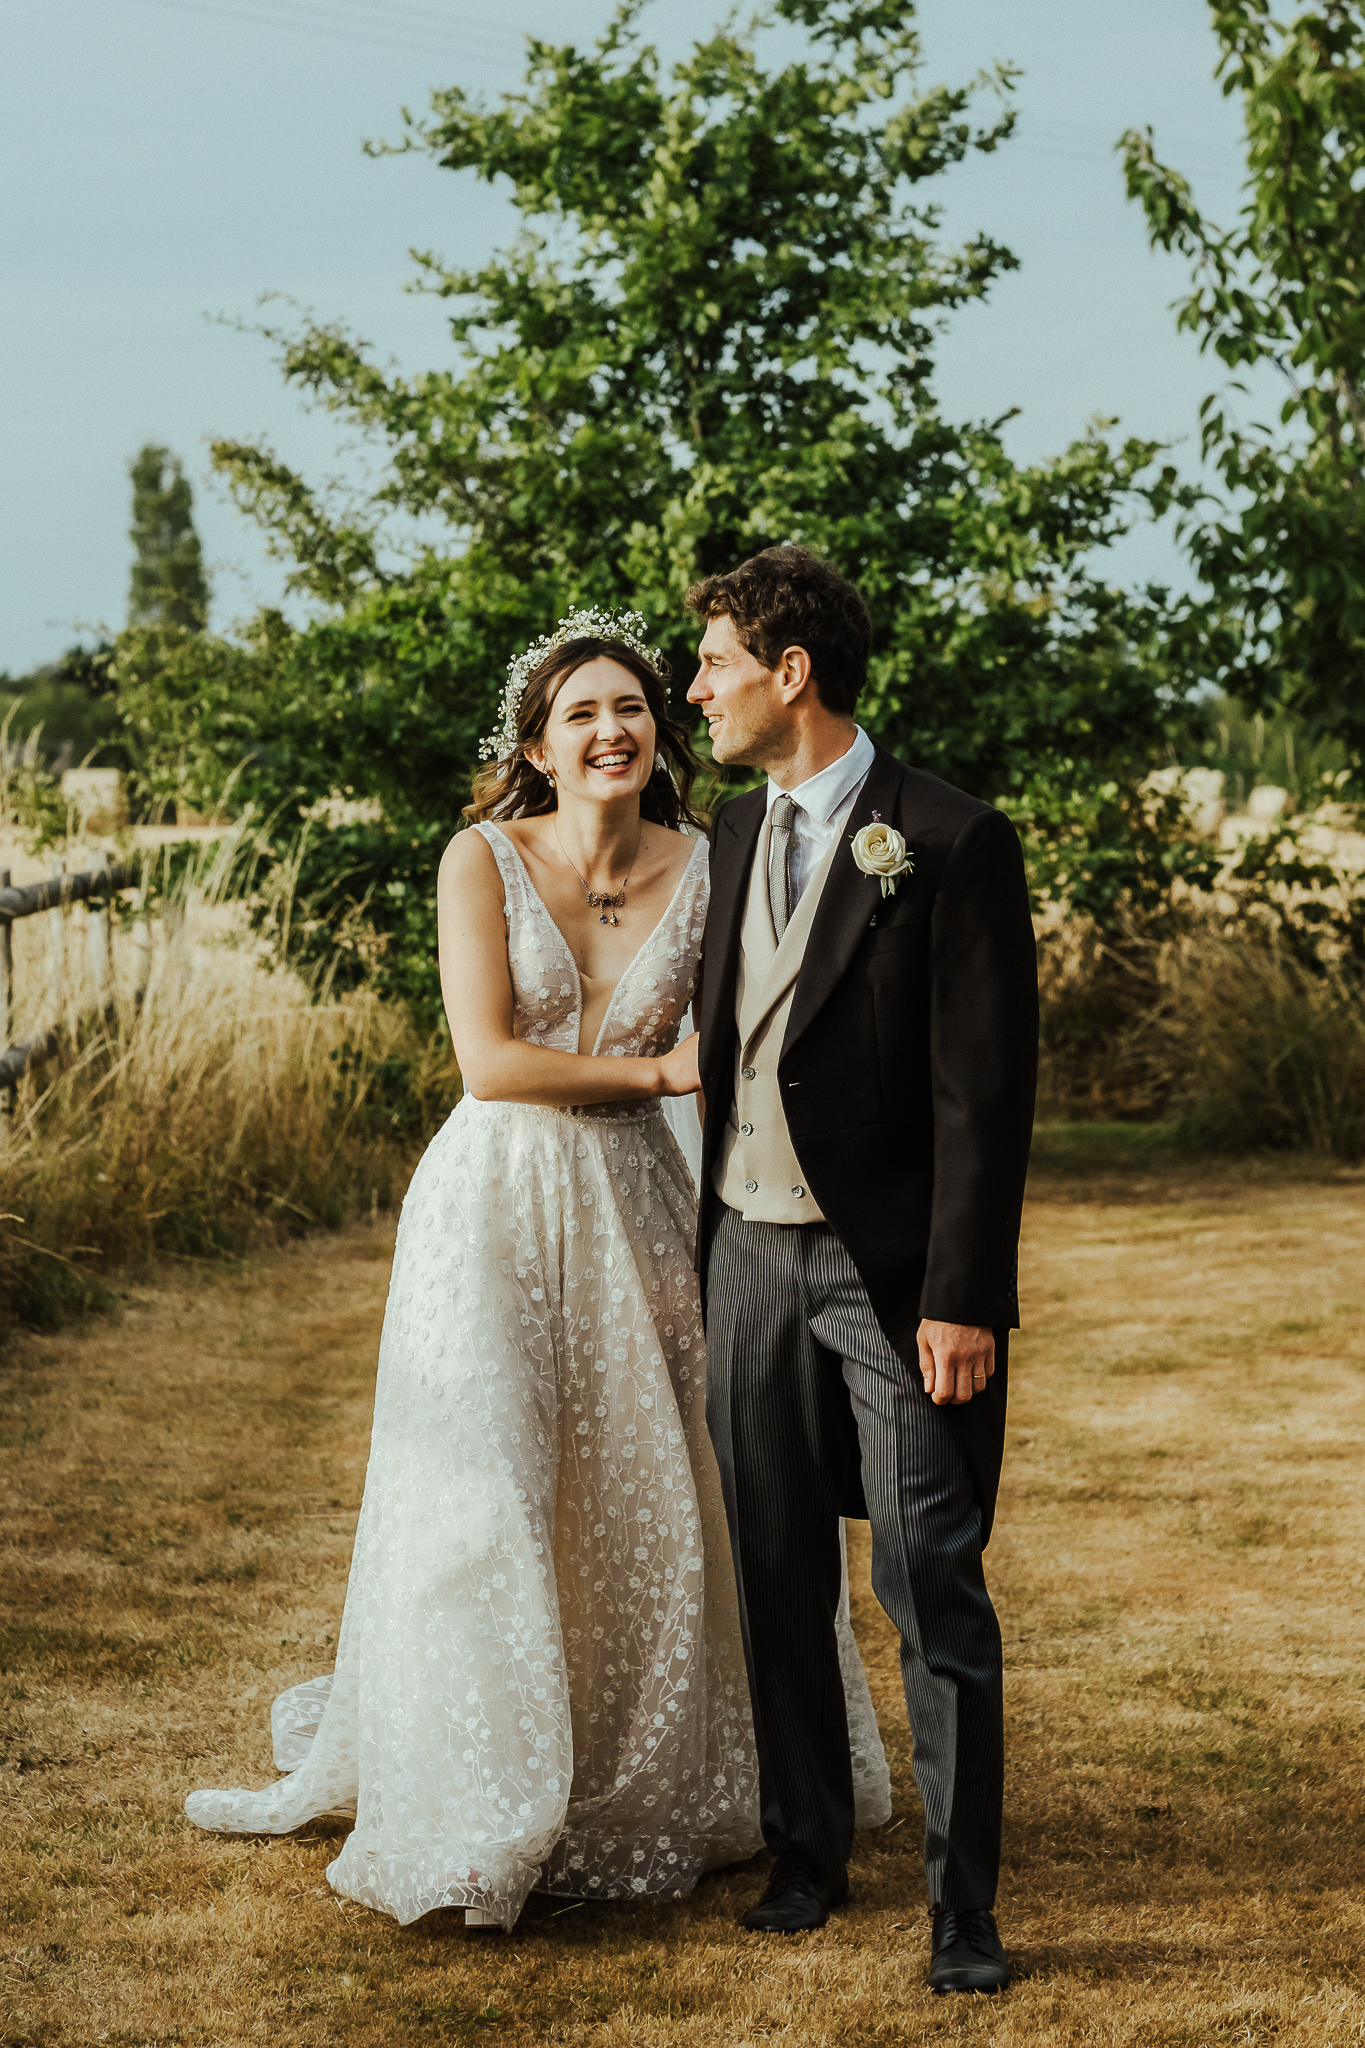 Stylish At-Home Wedding in the Kent Countryside